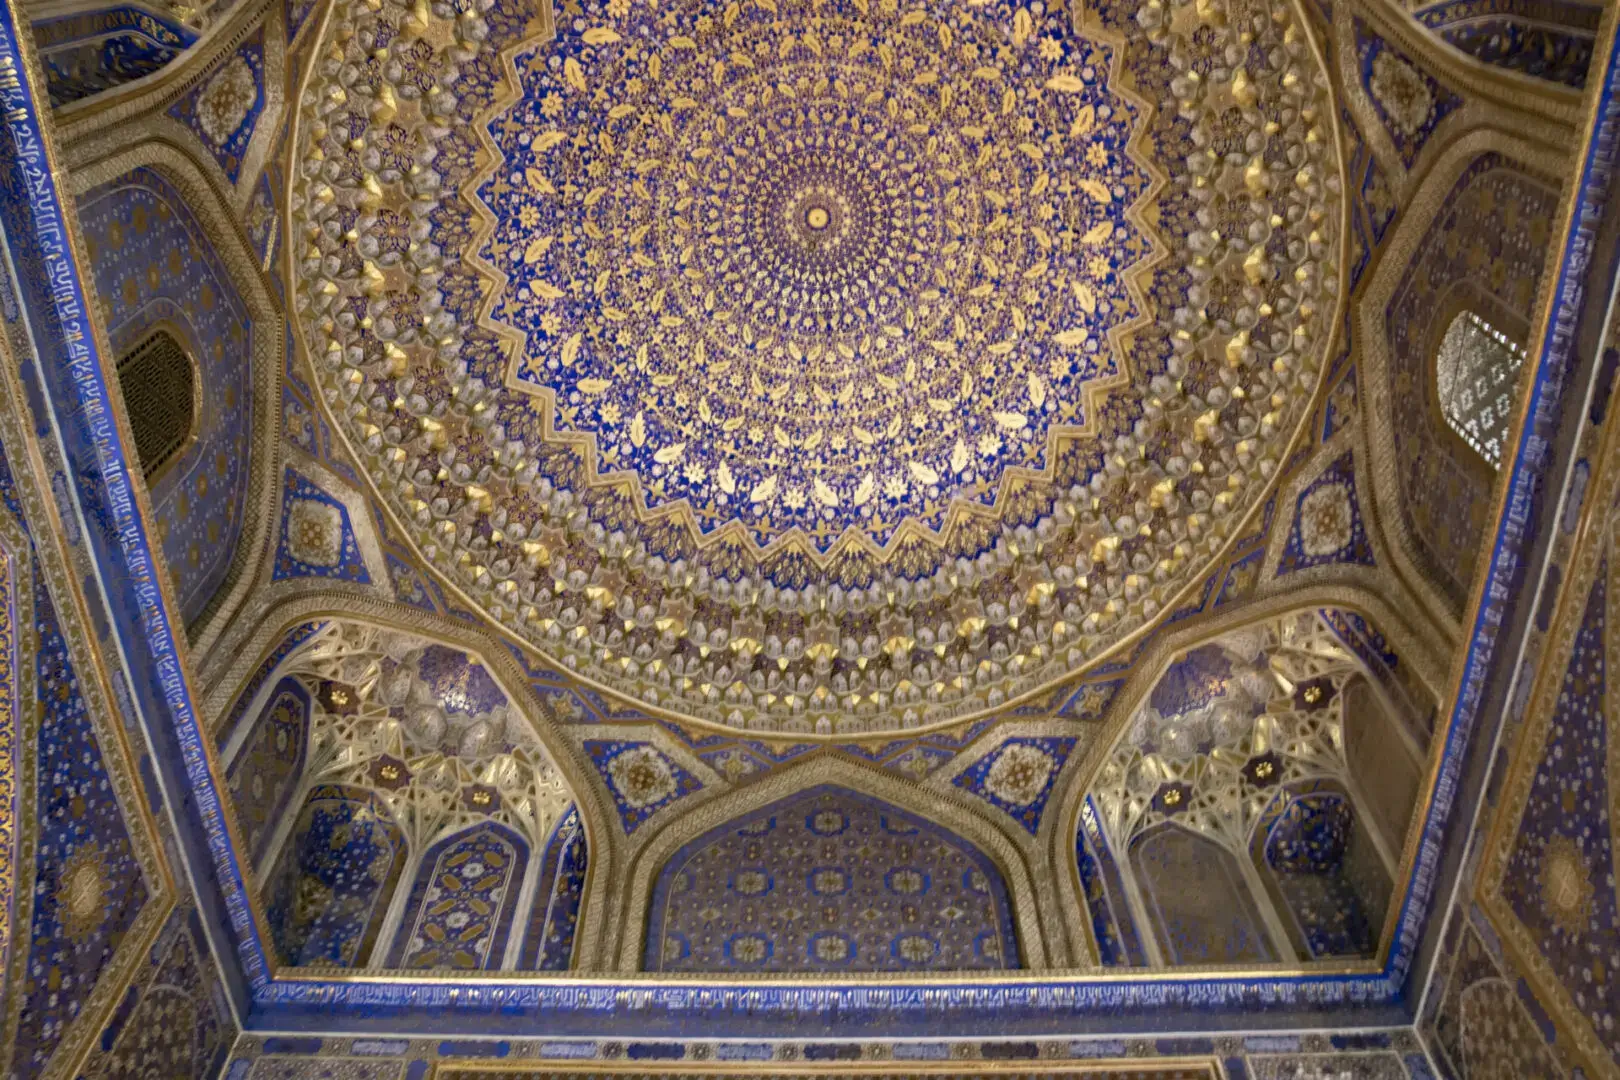 An ornate ceiling in a blue and gold building.